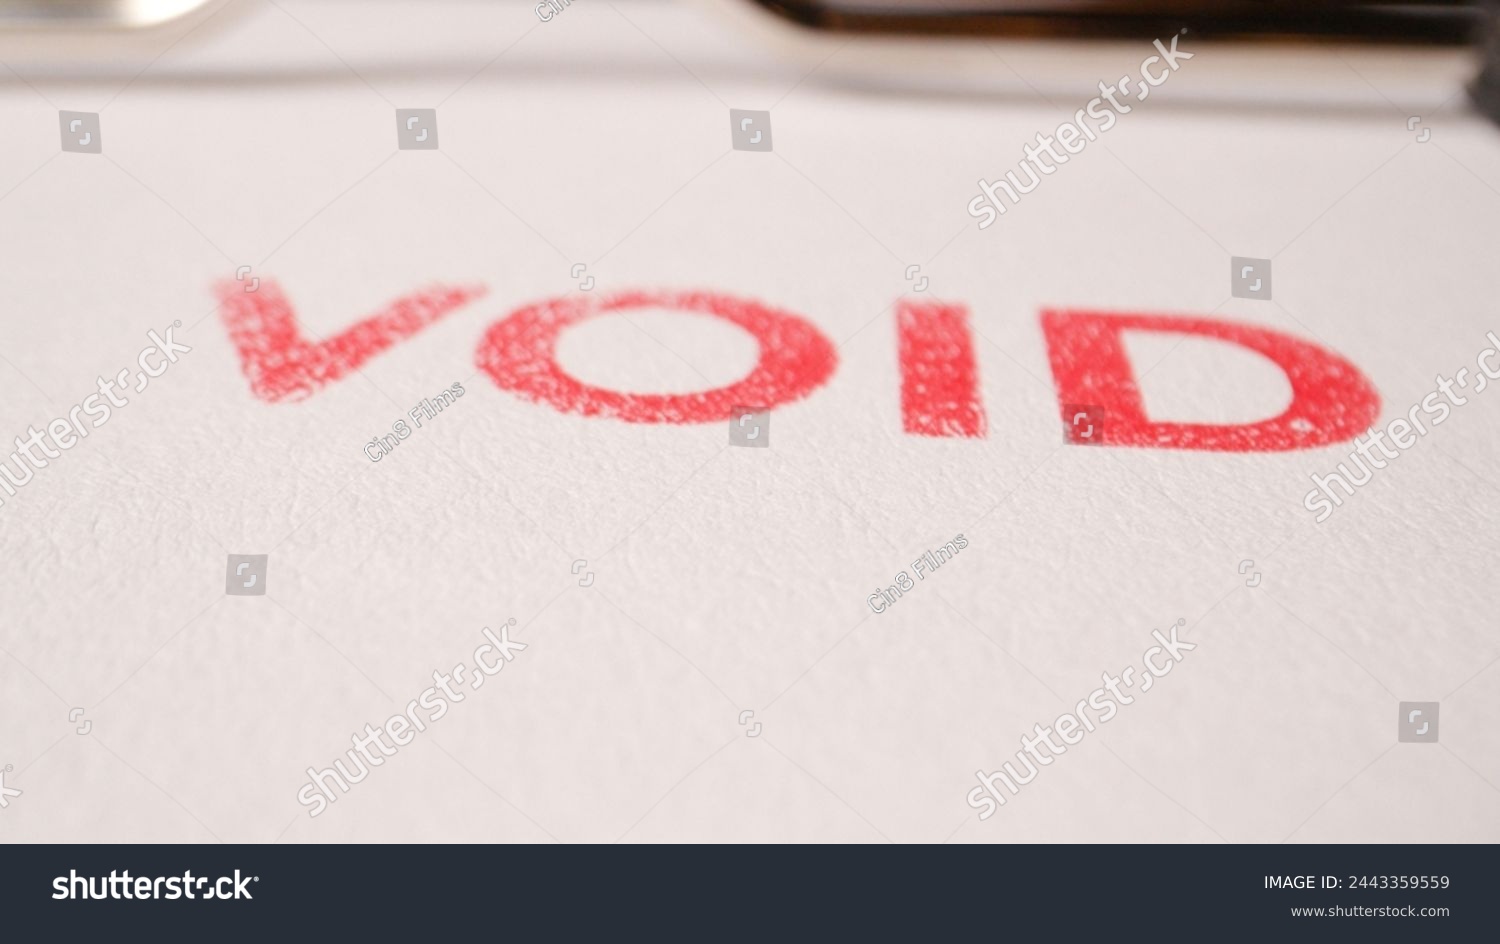 19 photo of red void stamp contract agreement invalidate concept #2443359559